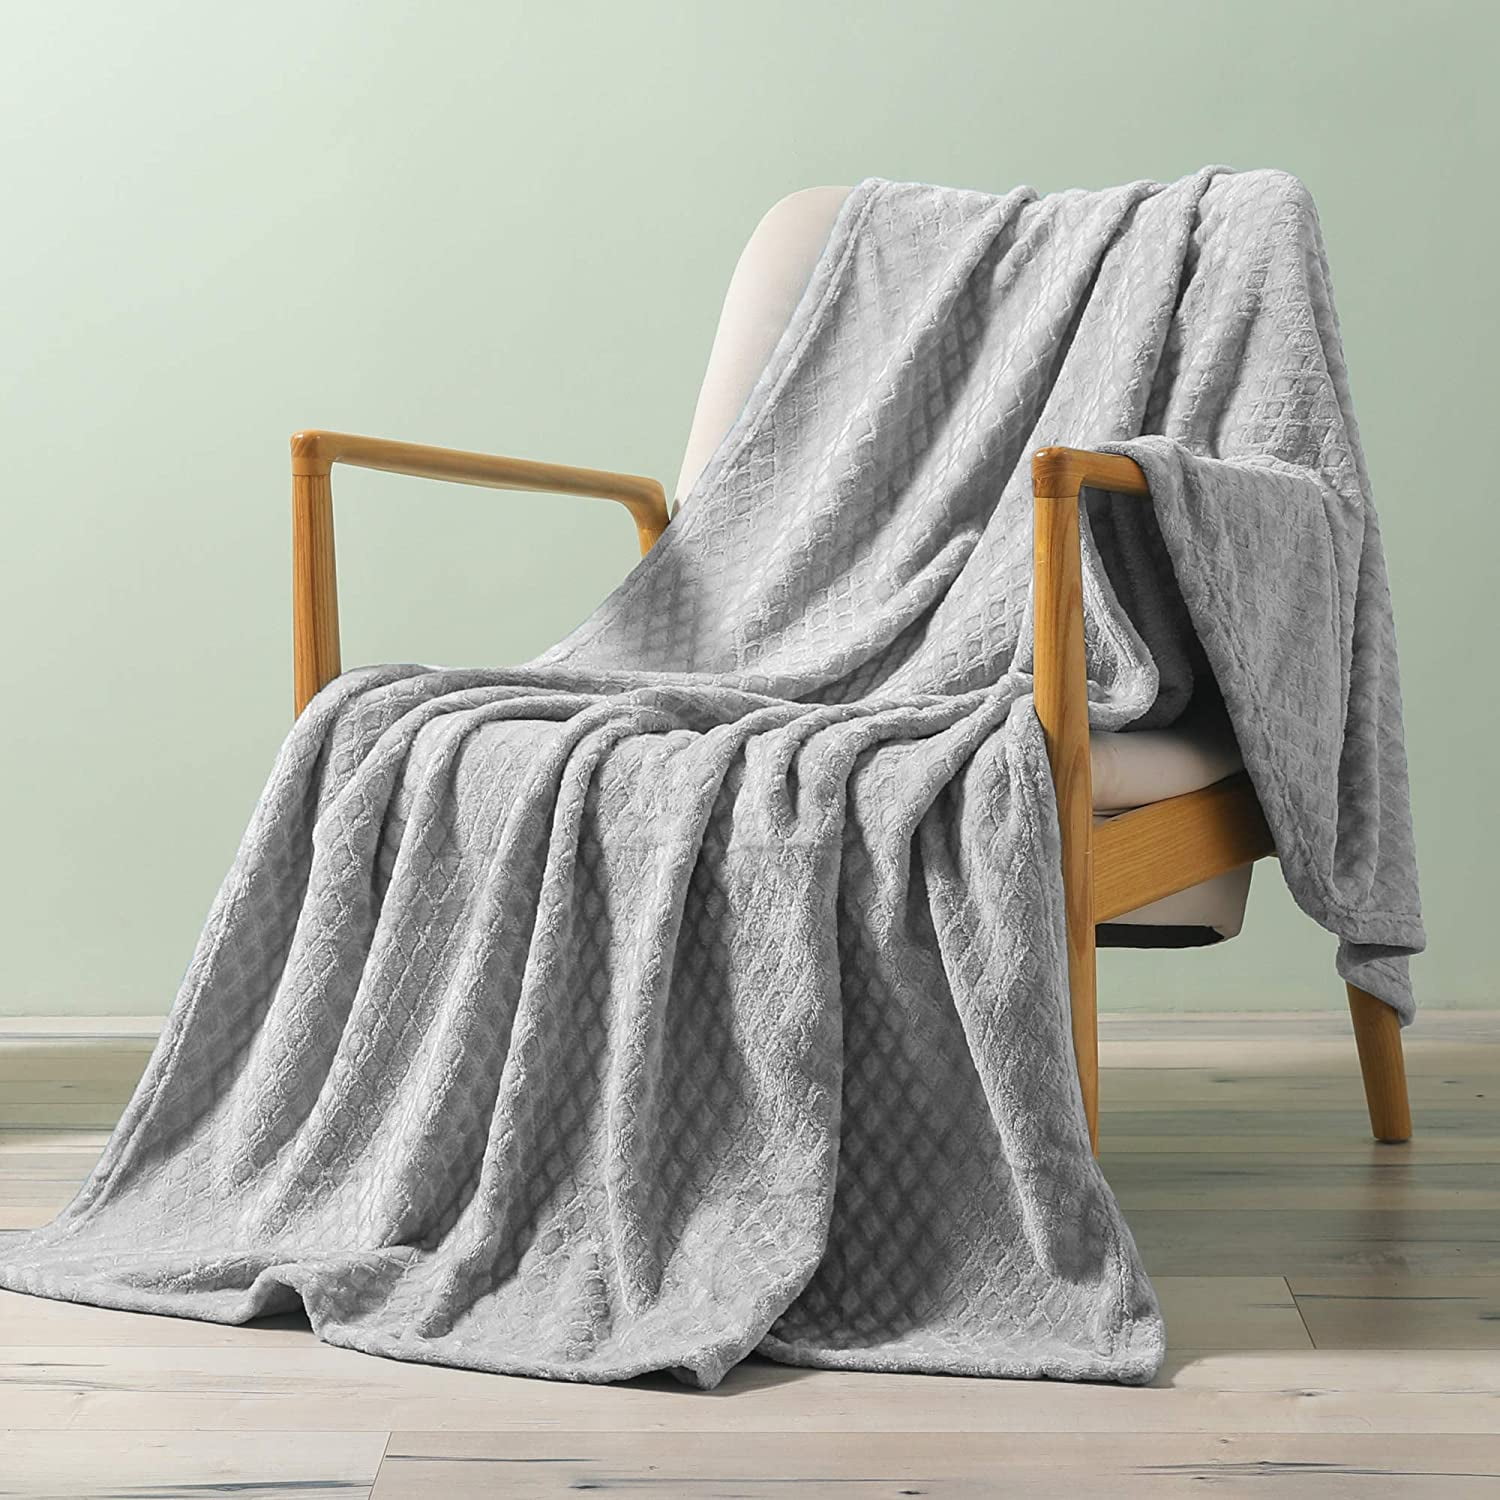 Exclusivo Mezcla Brushed Diamond Check Large Flannel Fleece Throw Blankets Warm and Lightweight -Soft Slate Blue, 50 x 70 